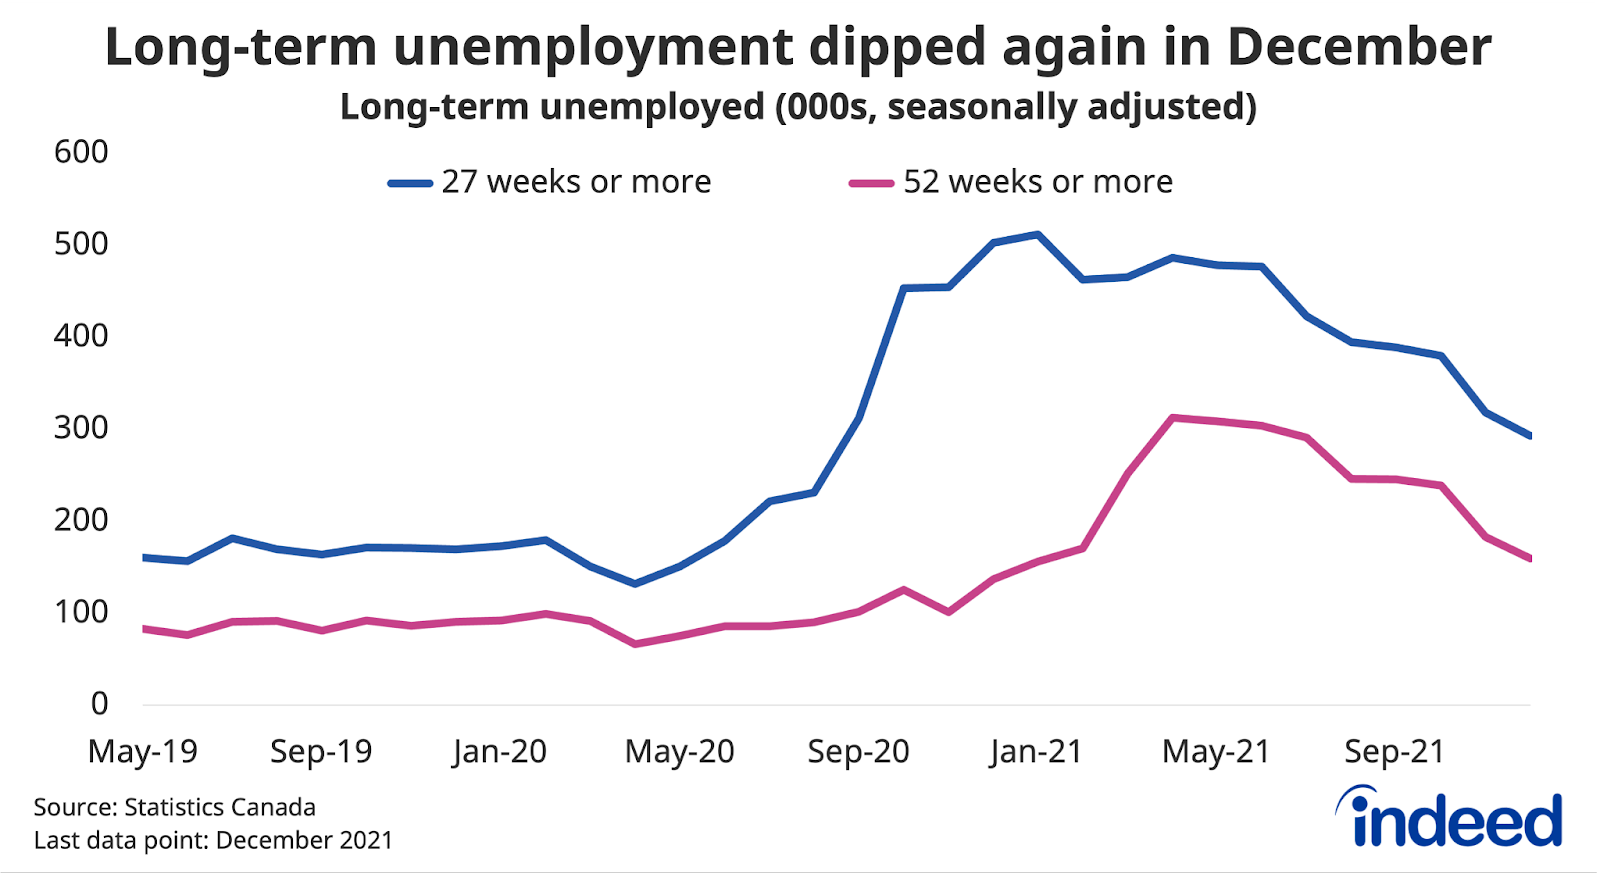 Line graph titled “Long-term unemployment dipped again in December.” With a vertical axis ranging from 0 to 600%, Indeed tracked the percent change in long-term unemployment along a vertical axis ranging from May 2019 to September 2021. The two line colours represent “27 weeks or more” and “52 weeks or more.” 